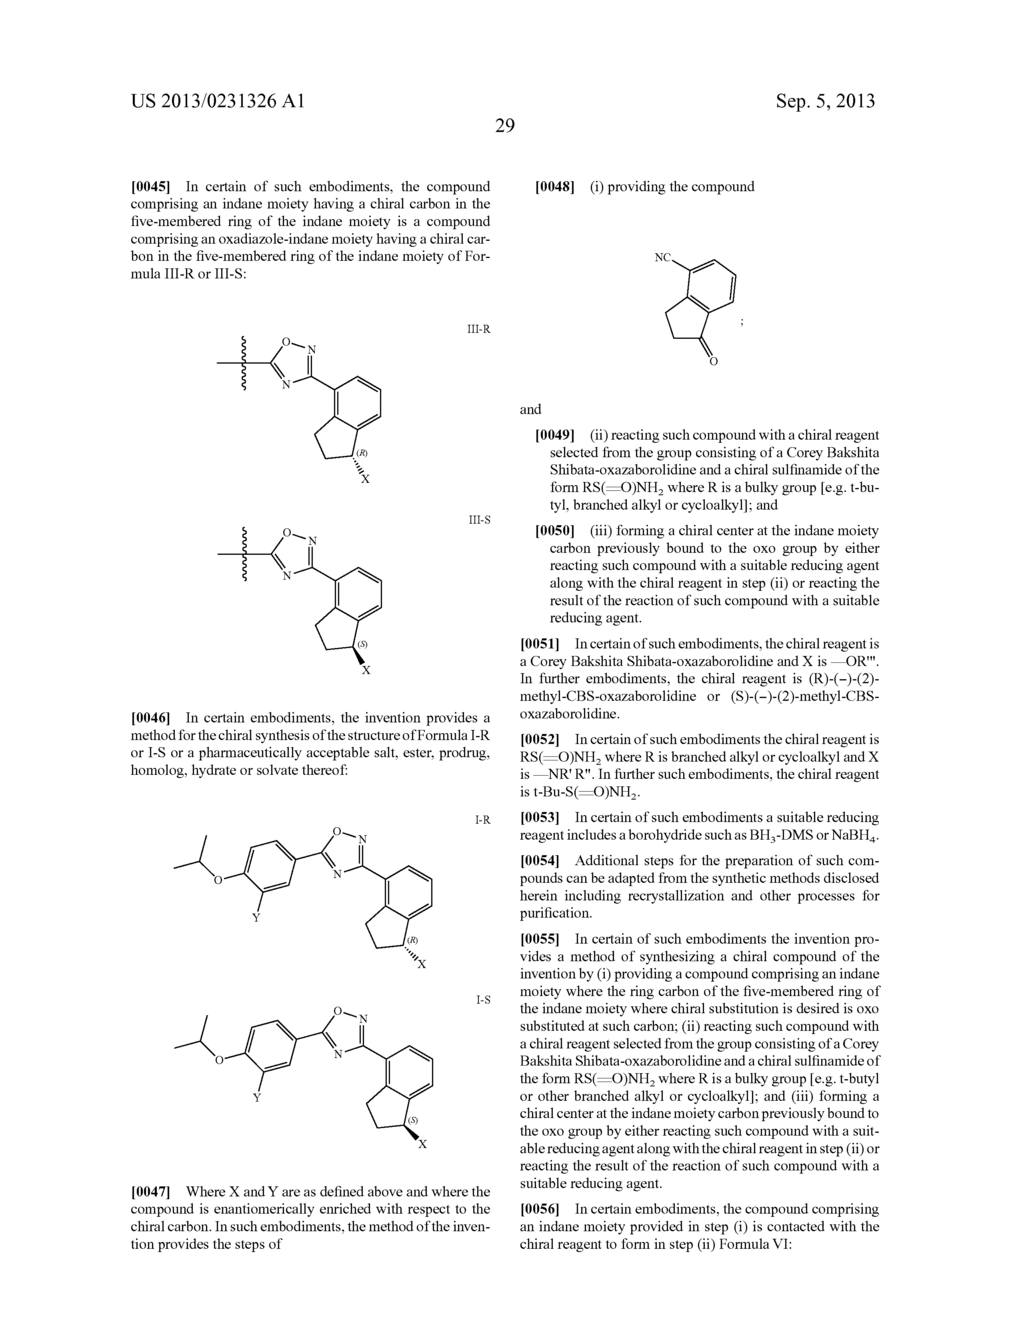 SELECTIVE SPHINGOSINE 1 PHOSPHATE RECEPTOR MODULATORS AND METHODS OF     CHIRAL SYNTHESIS - diagram, schematic, and image 30